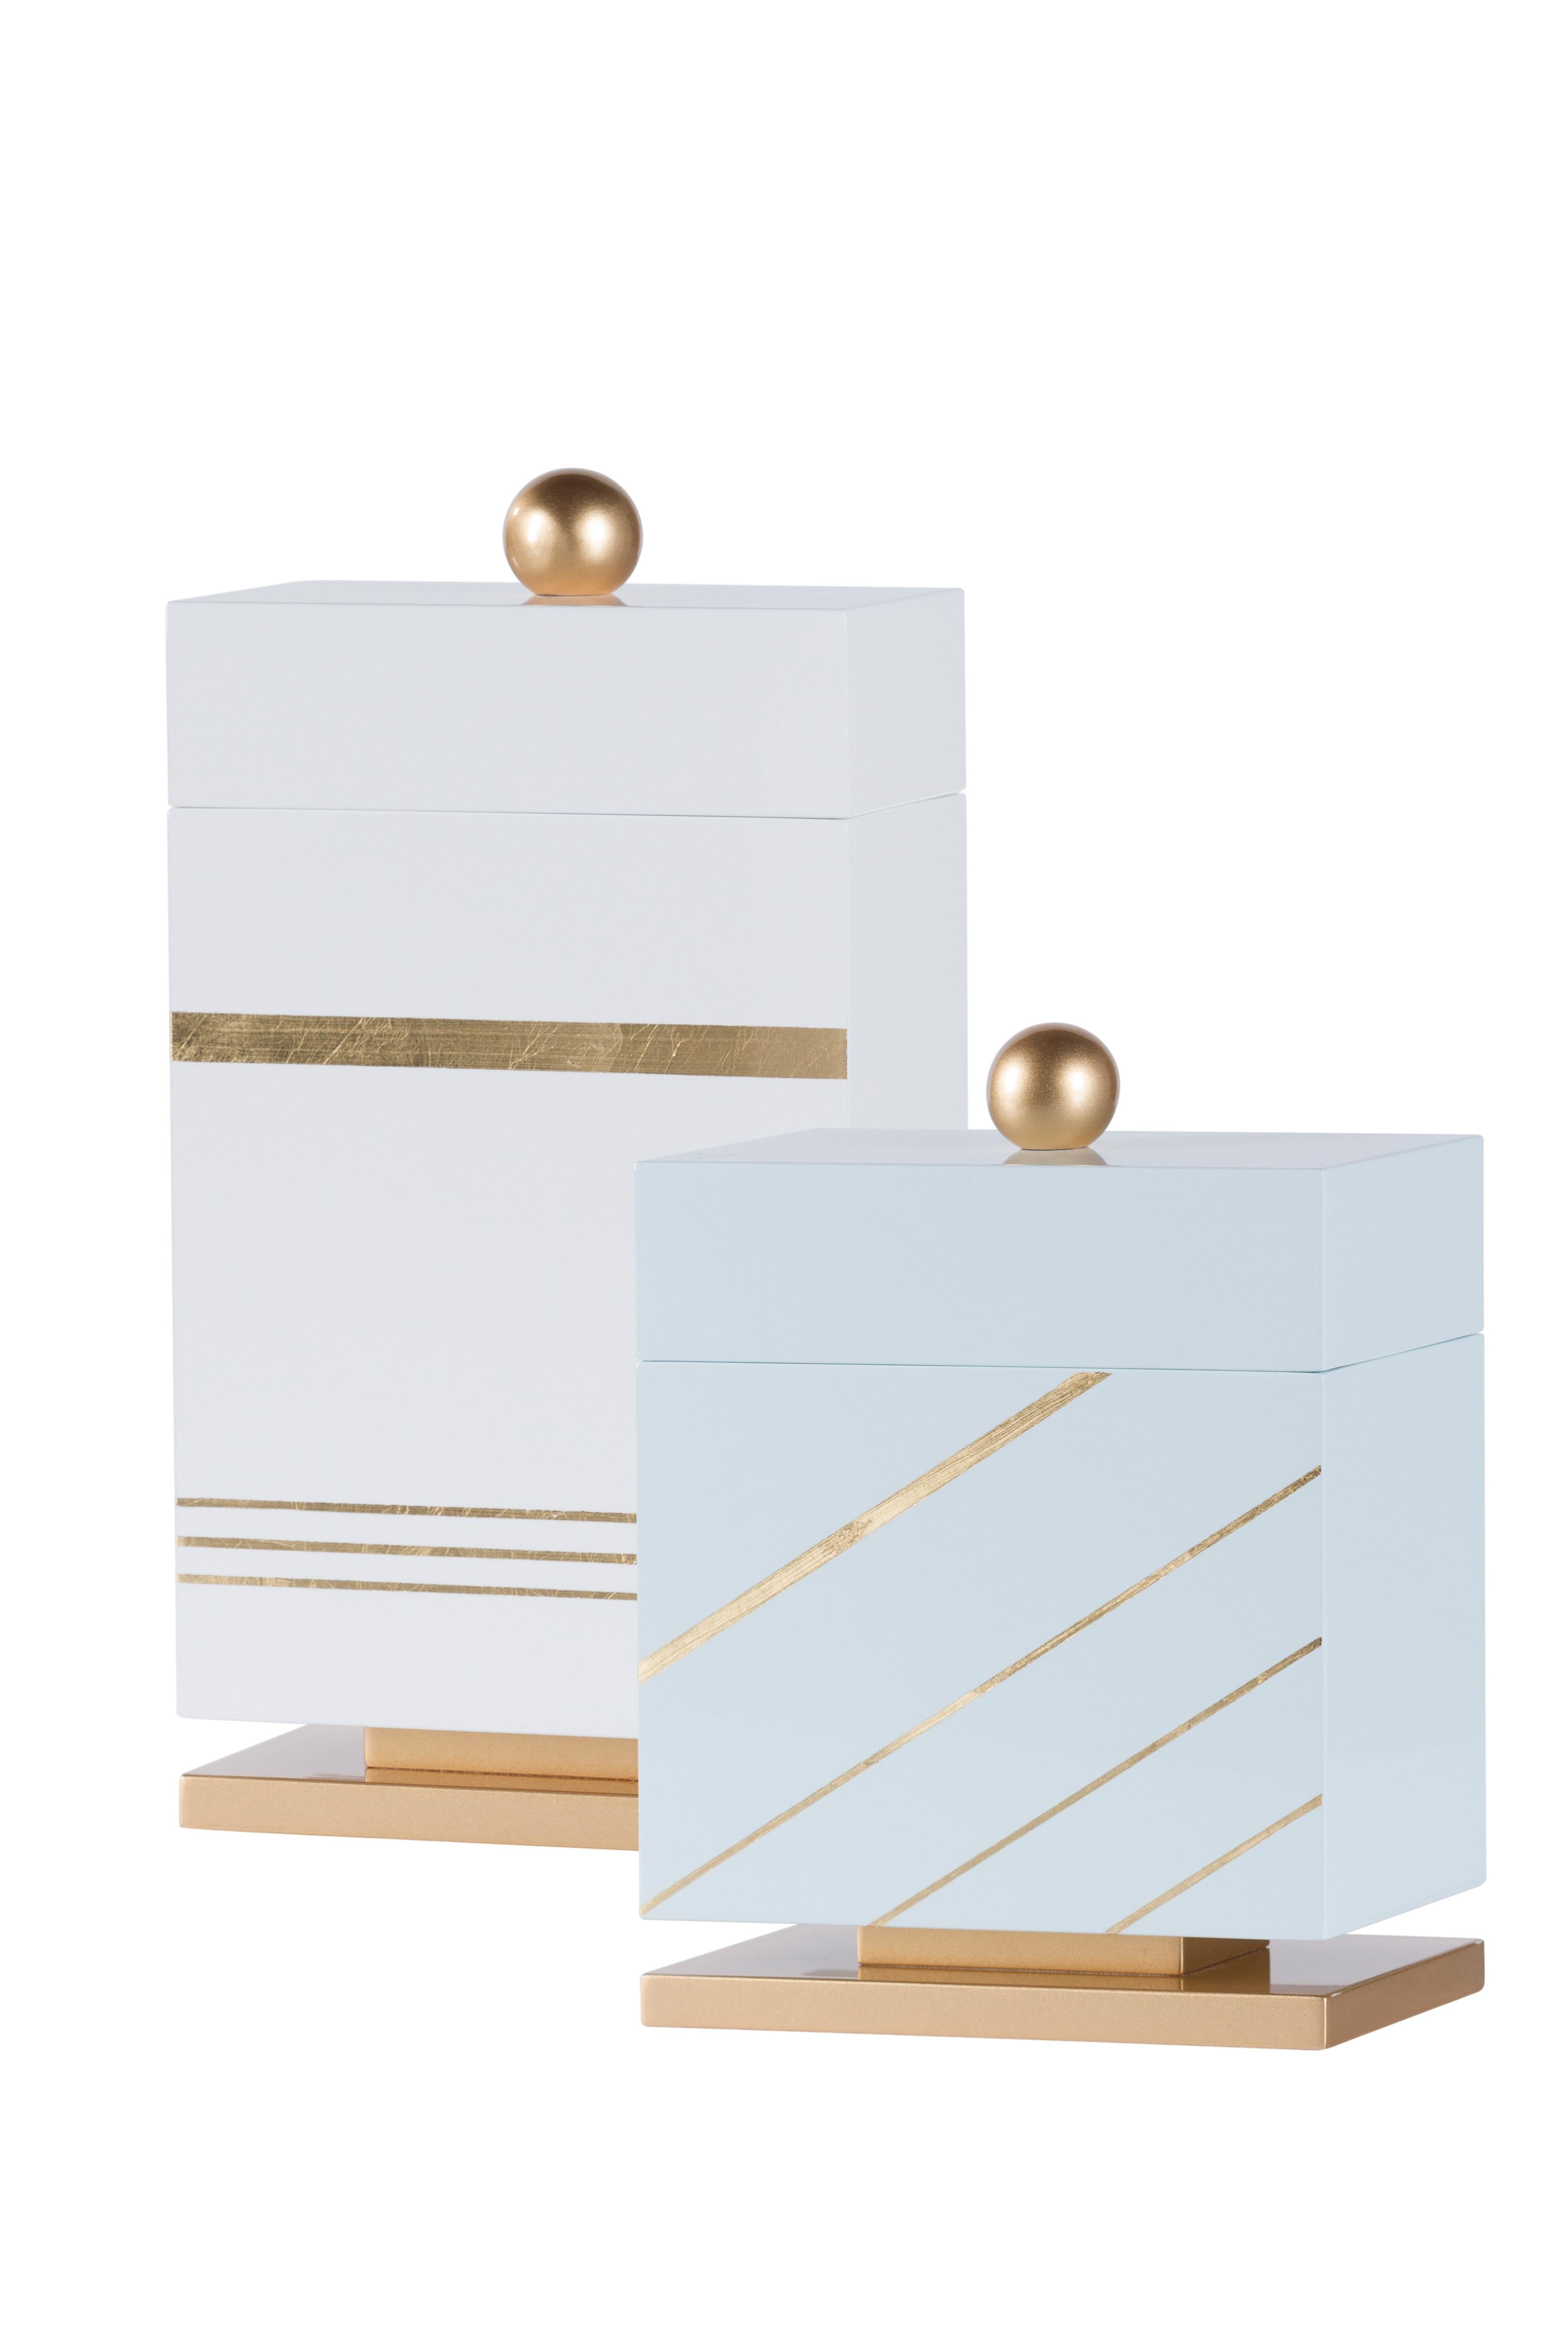 Gilt Set/2 Boxes, White and Light-Blue, Handmade in Portugal by Lusitanus Home For Sale